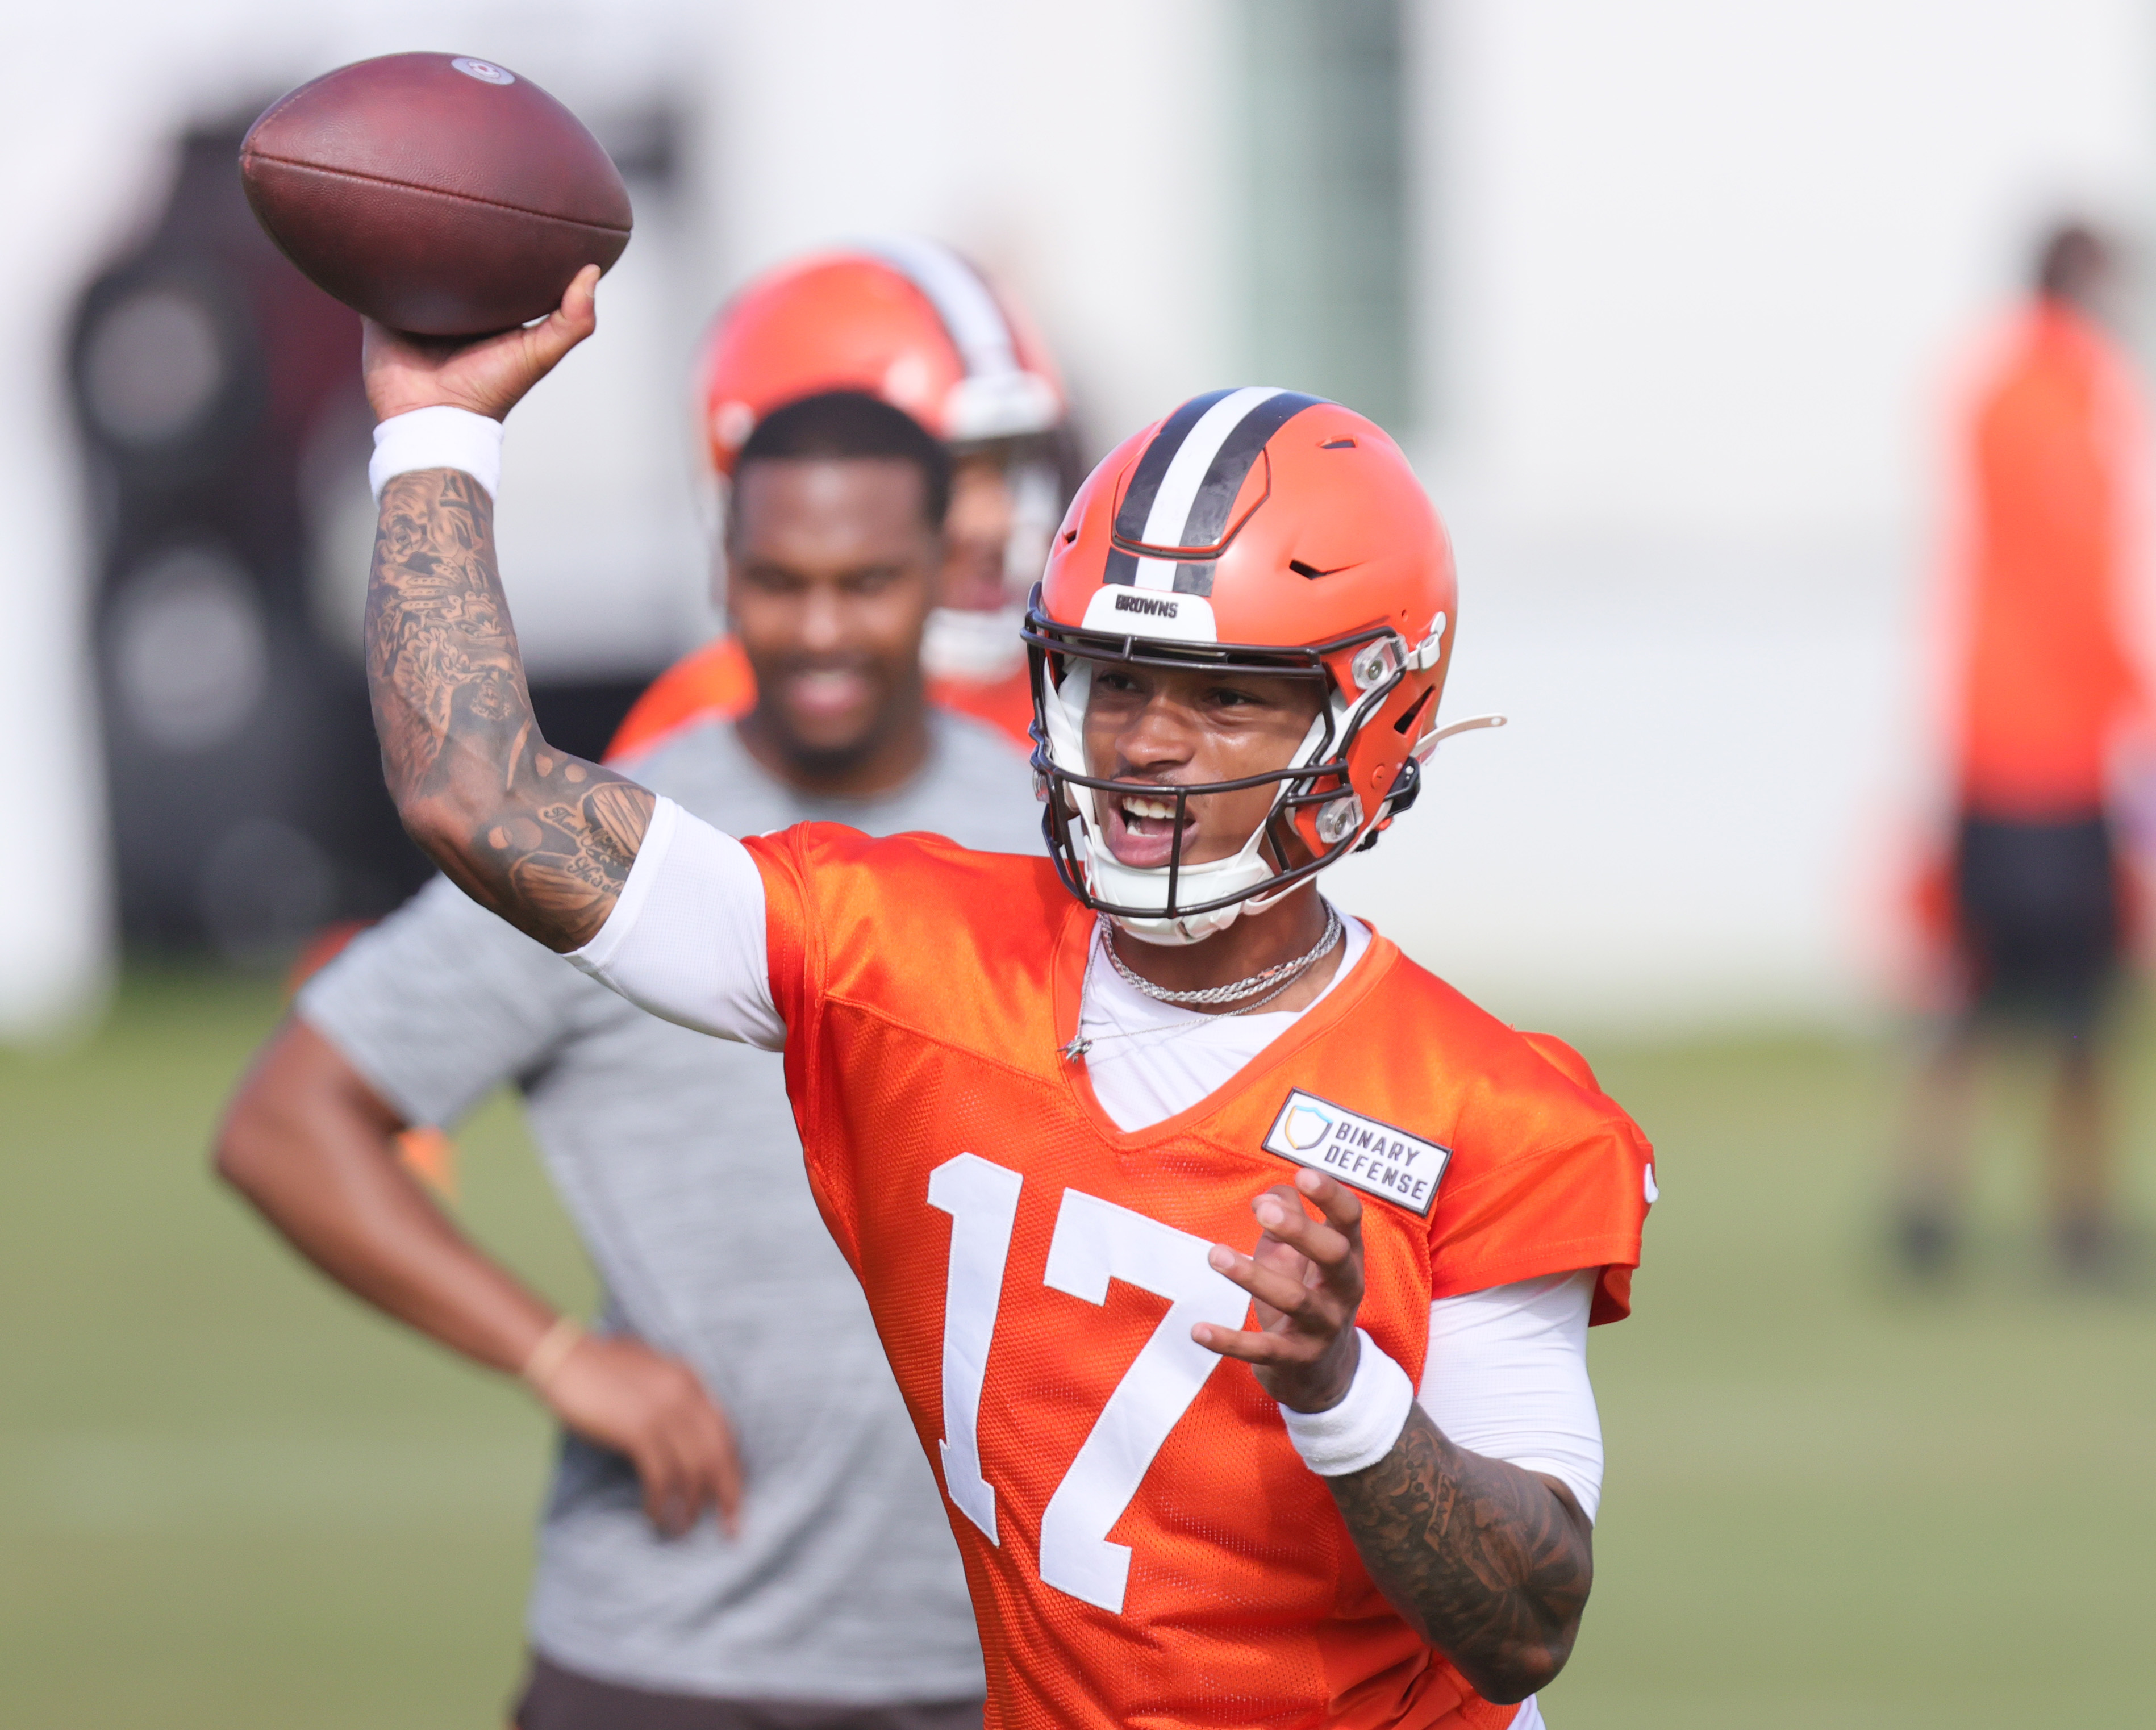 Monday Night Football: How to watch tonight's Cleveland Browns vs